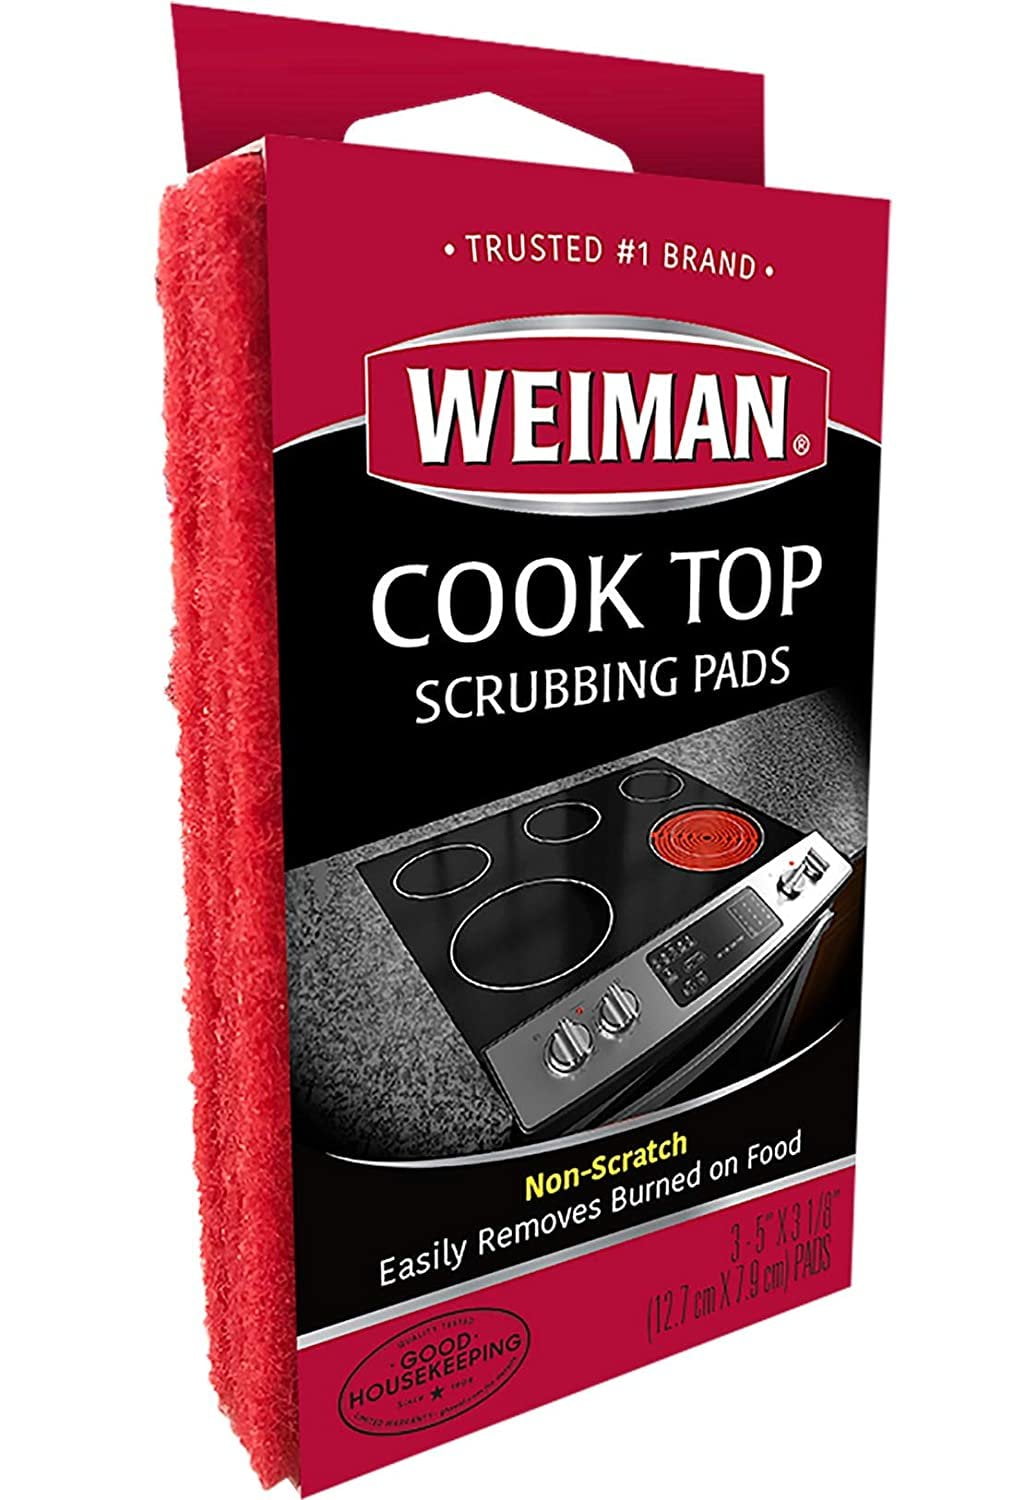 Weiman Cook Top Scrubbing Pads Ndash; Gently Clean And Remove Burned-On Food Fr 